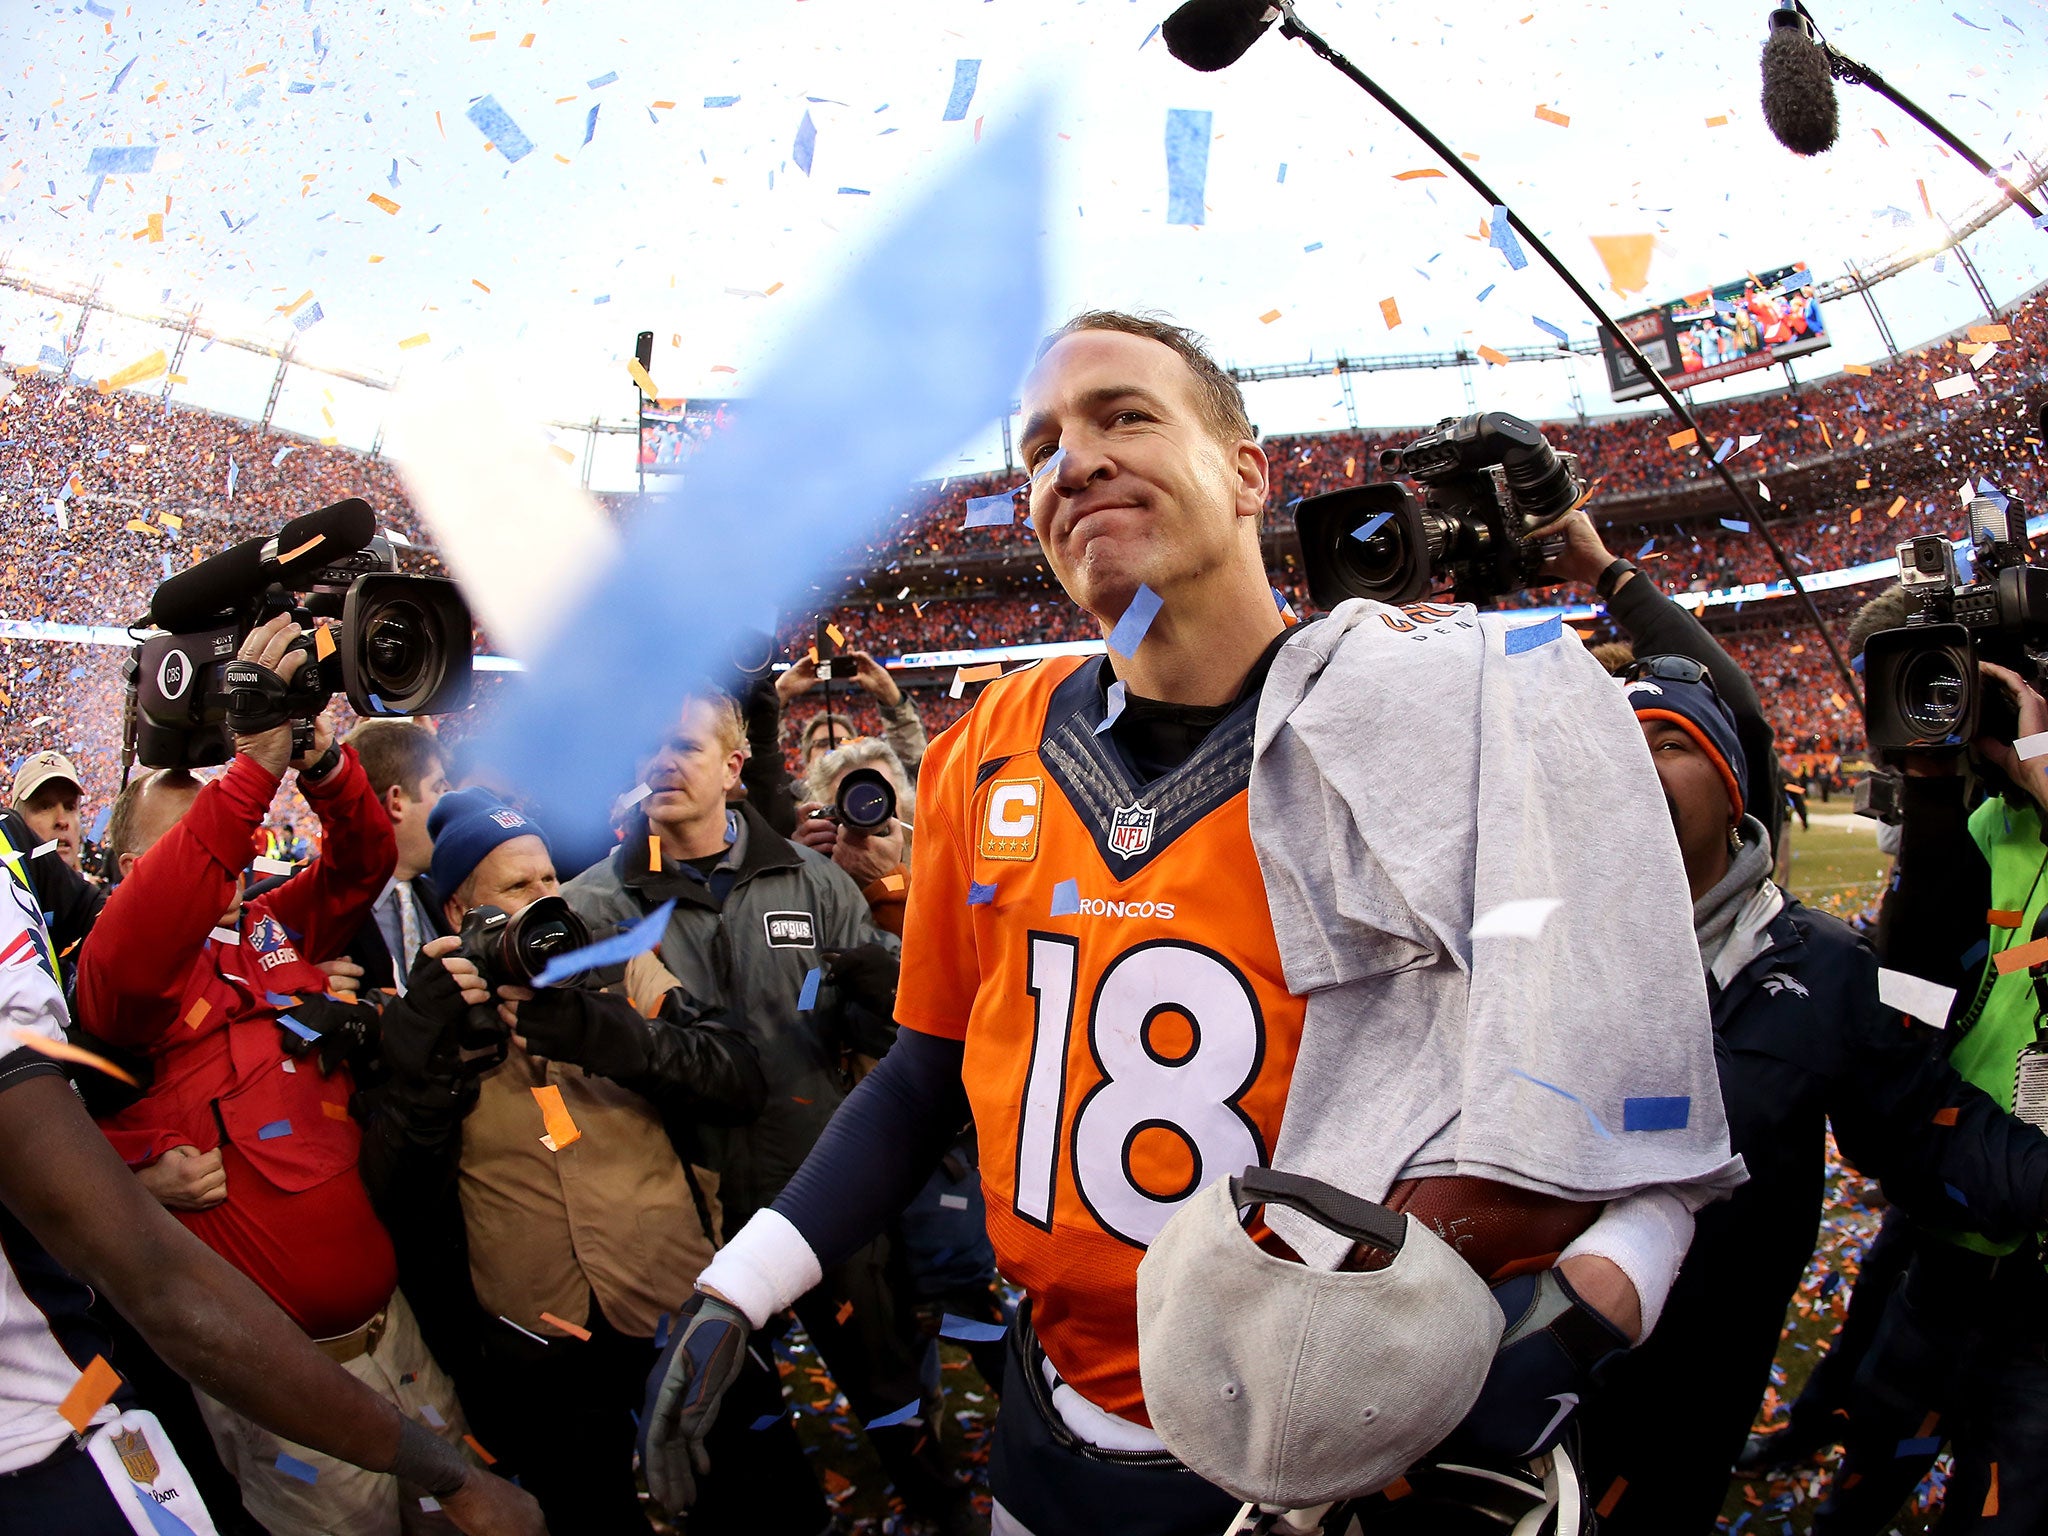 Peyton Manning could be appearing in his final NFL match as he ponders retirement